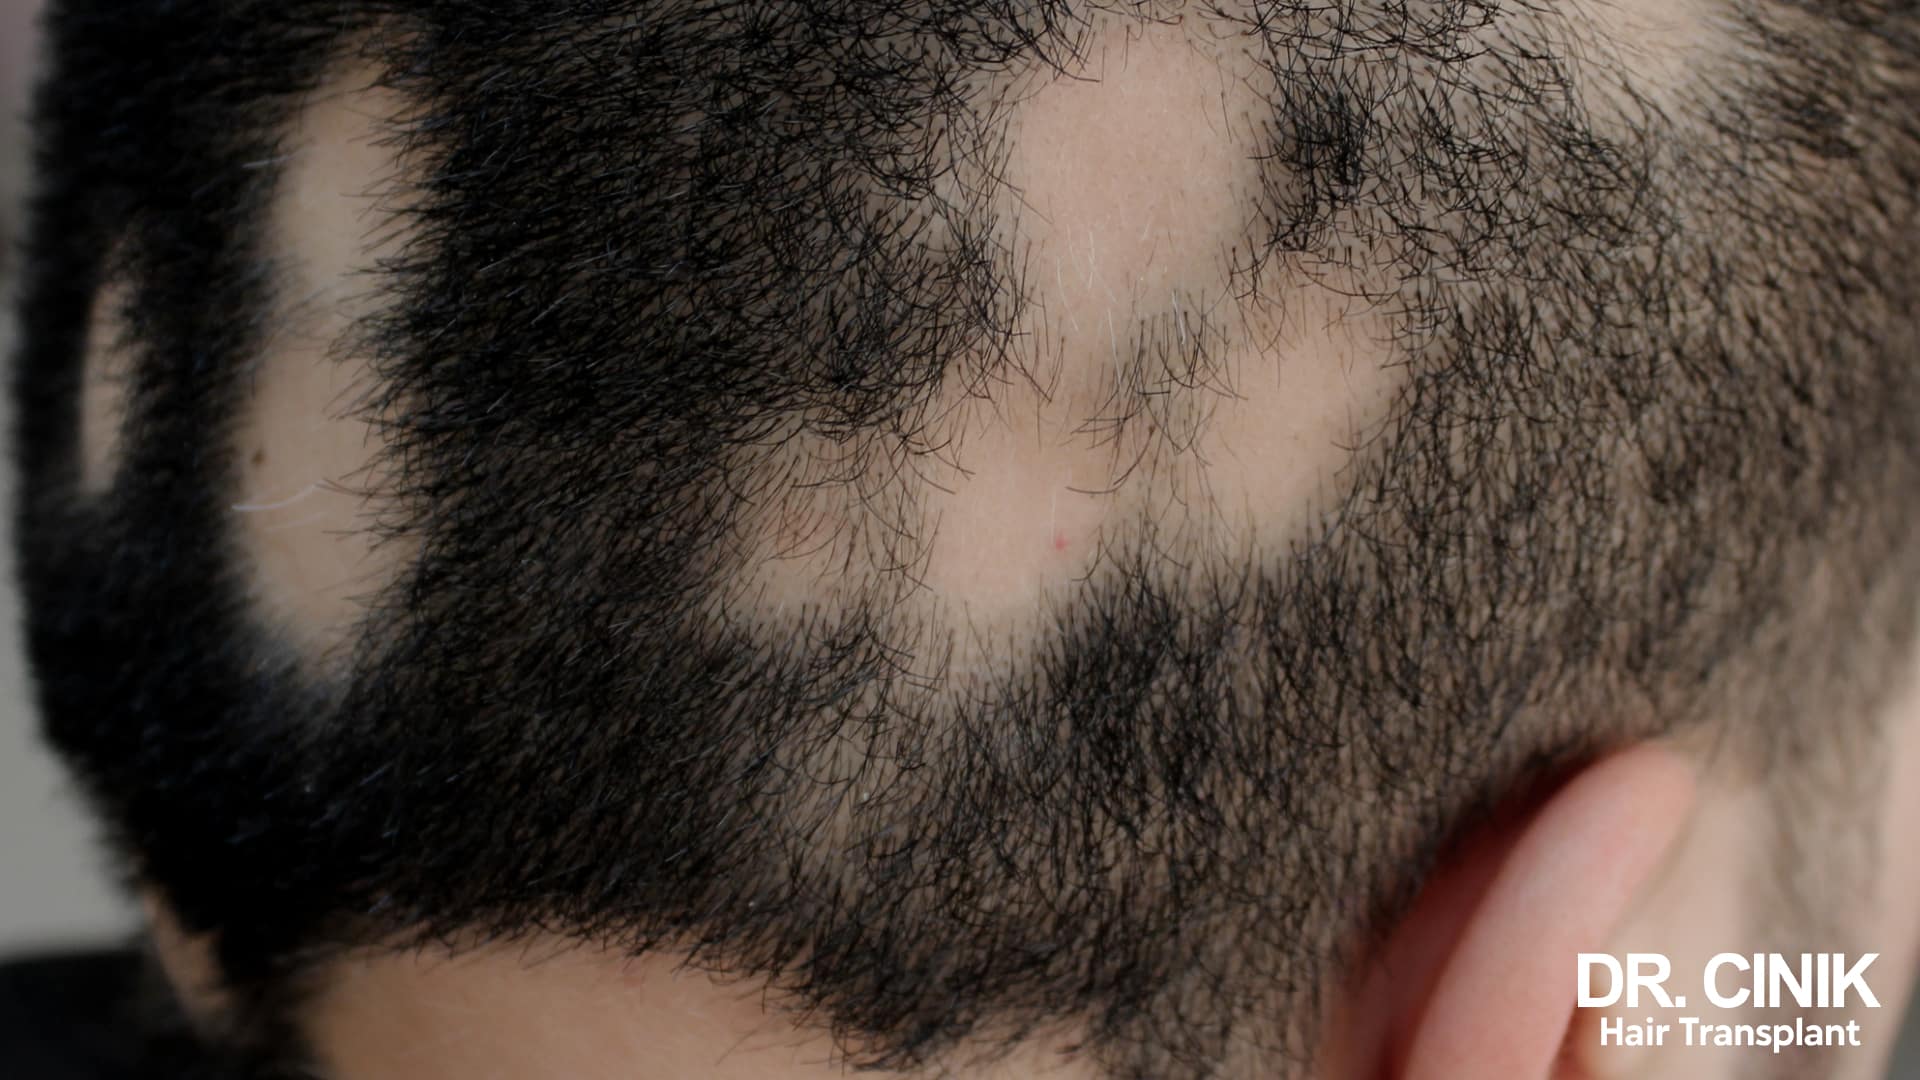 Alopecia Areata, a type of patchy hair loss